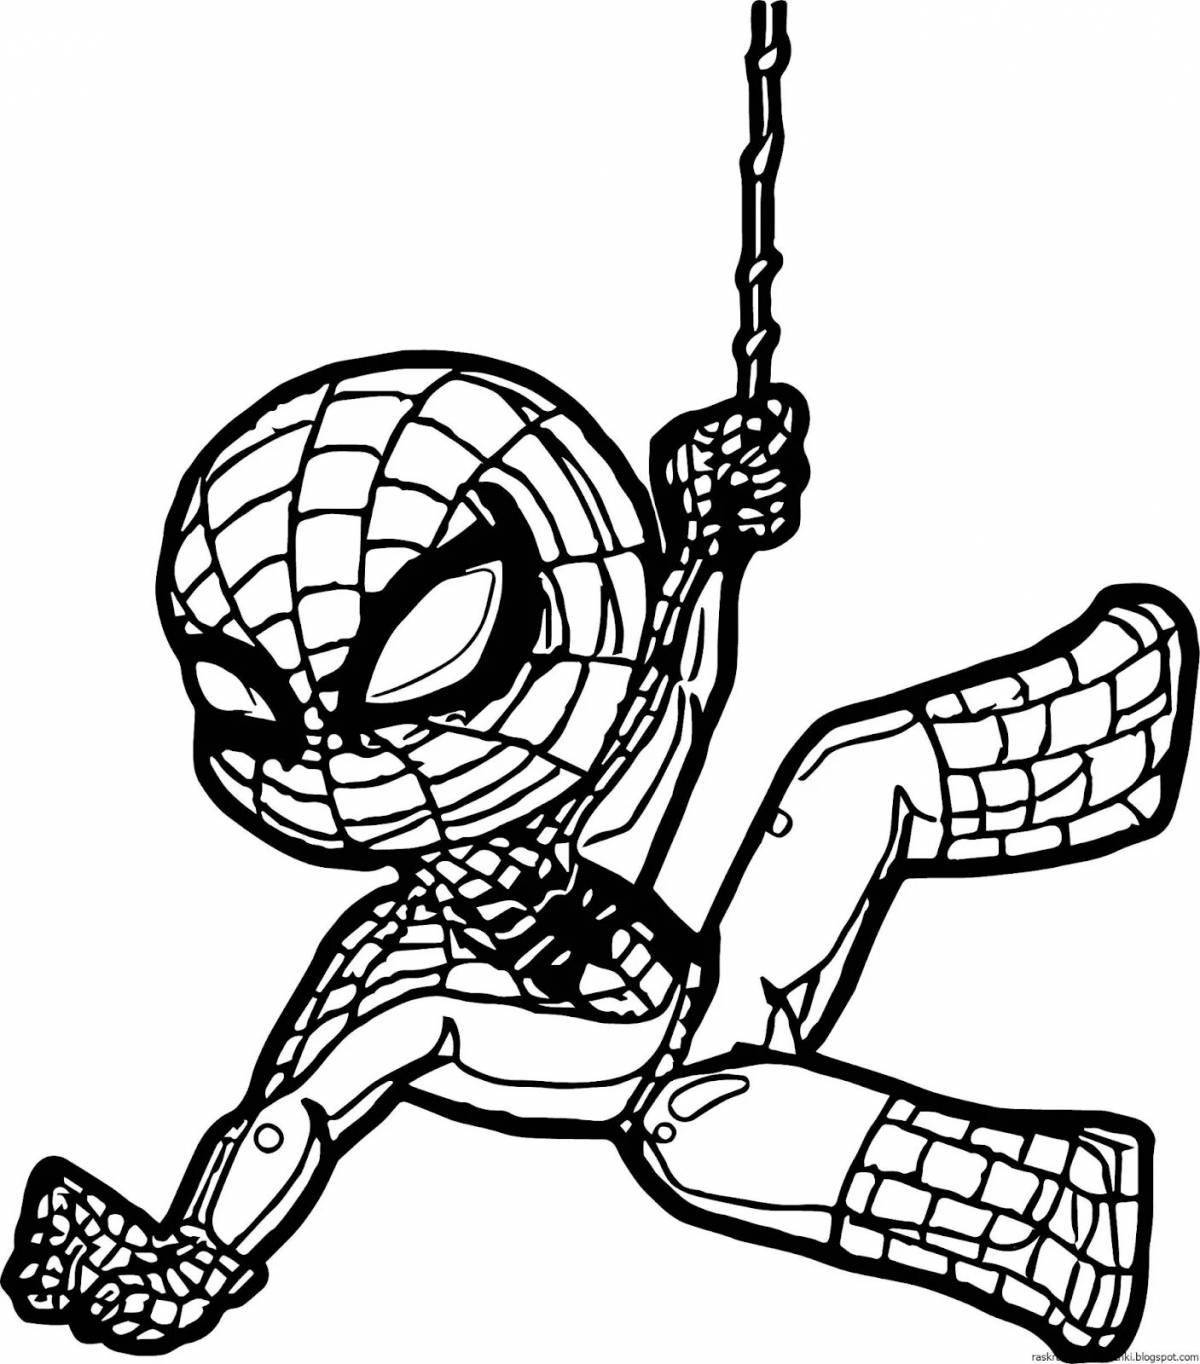 Fabulous pre-k spiderman coloring page